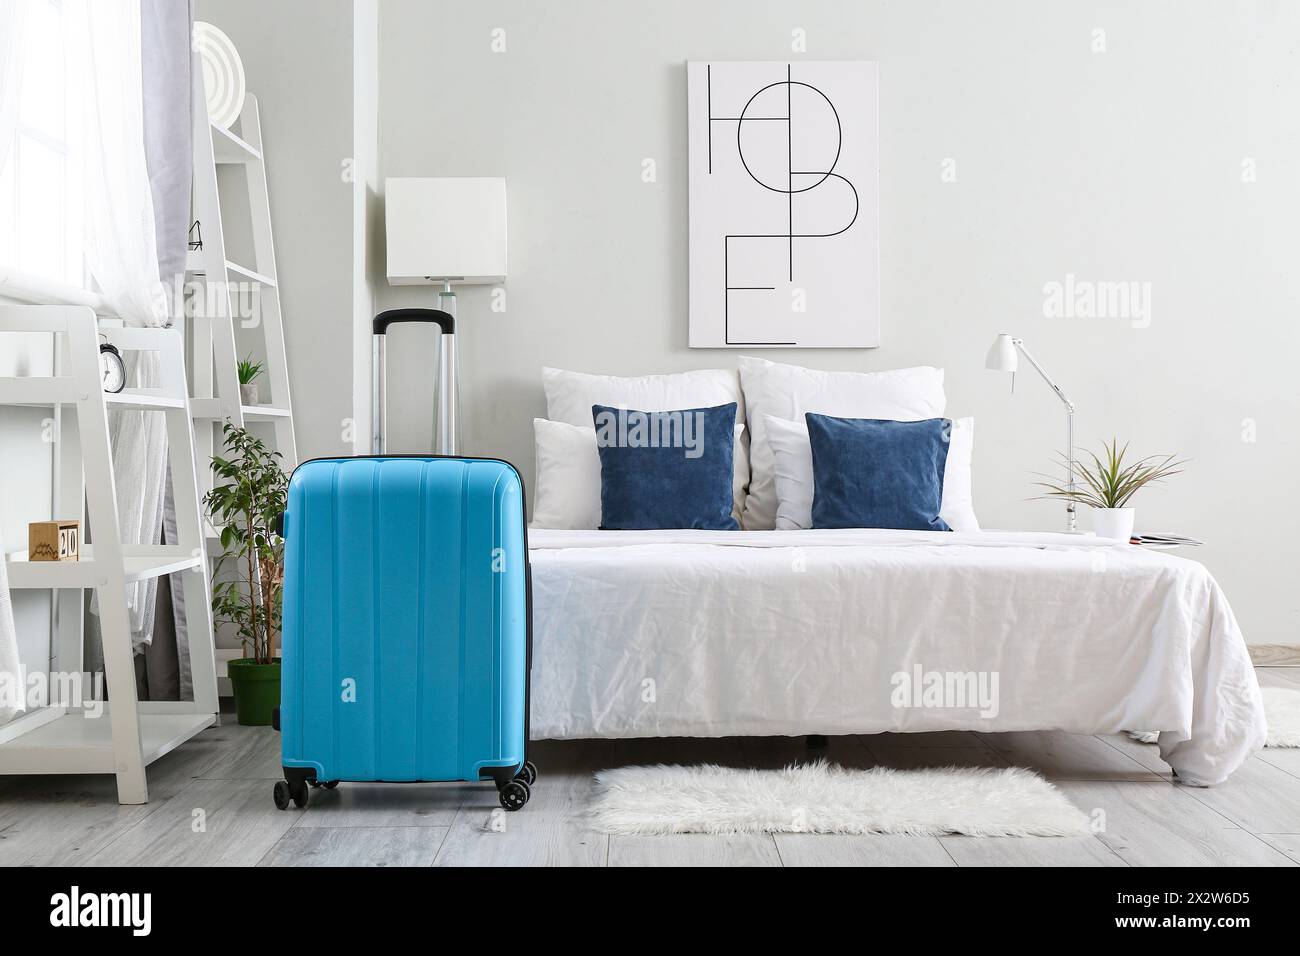 Interior of light hotel room with suitcase near bed Stock Photo